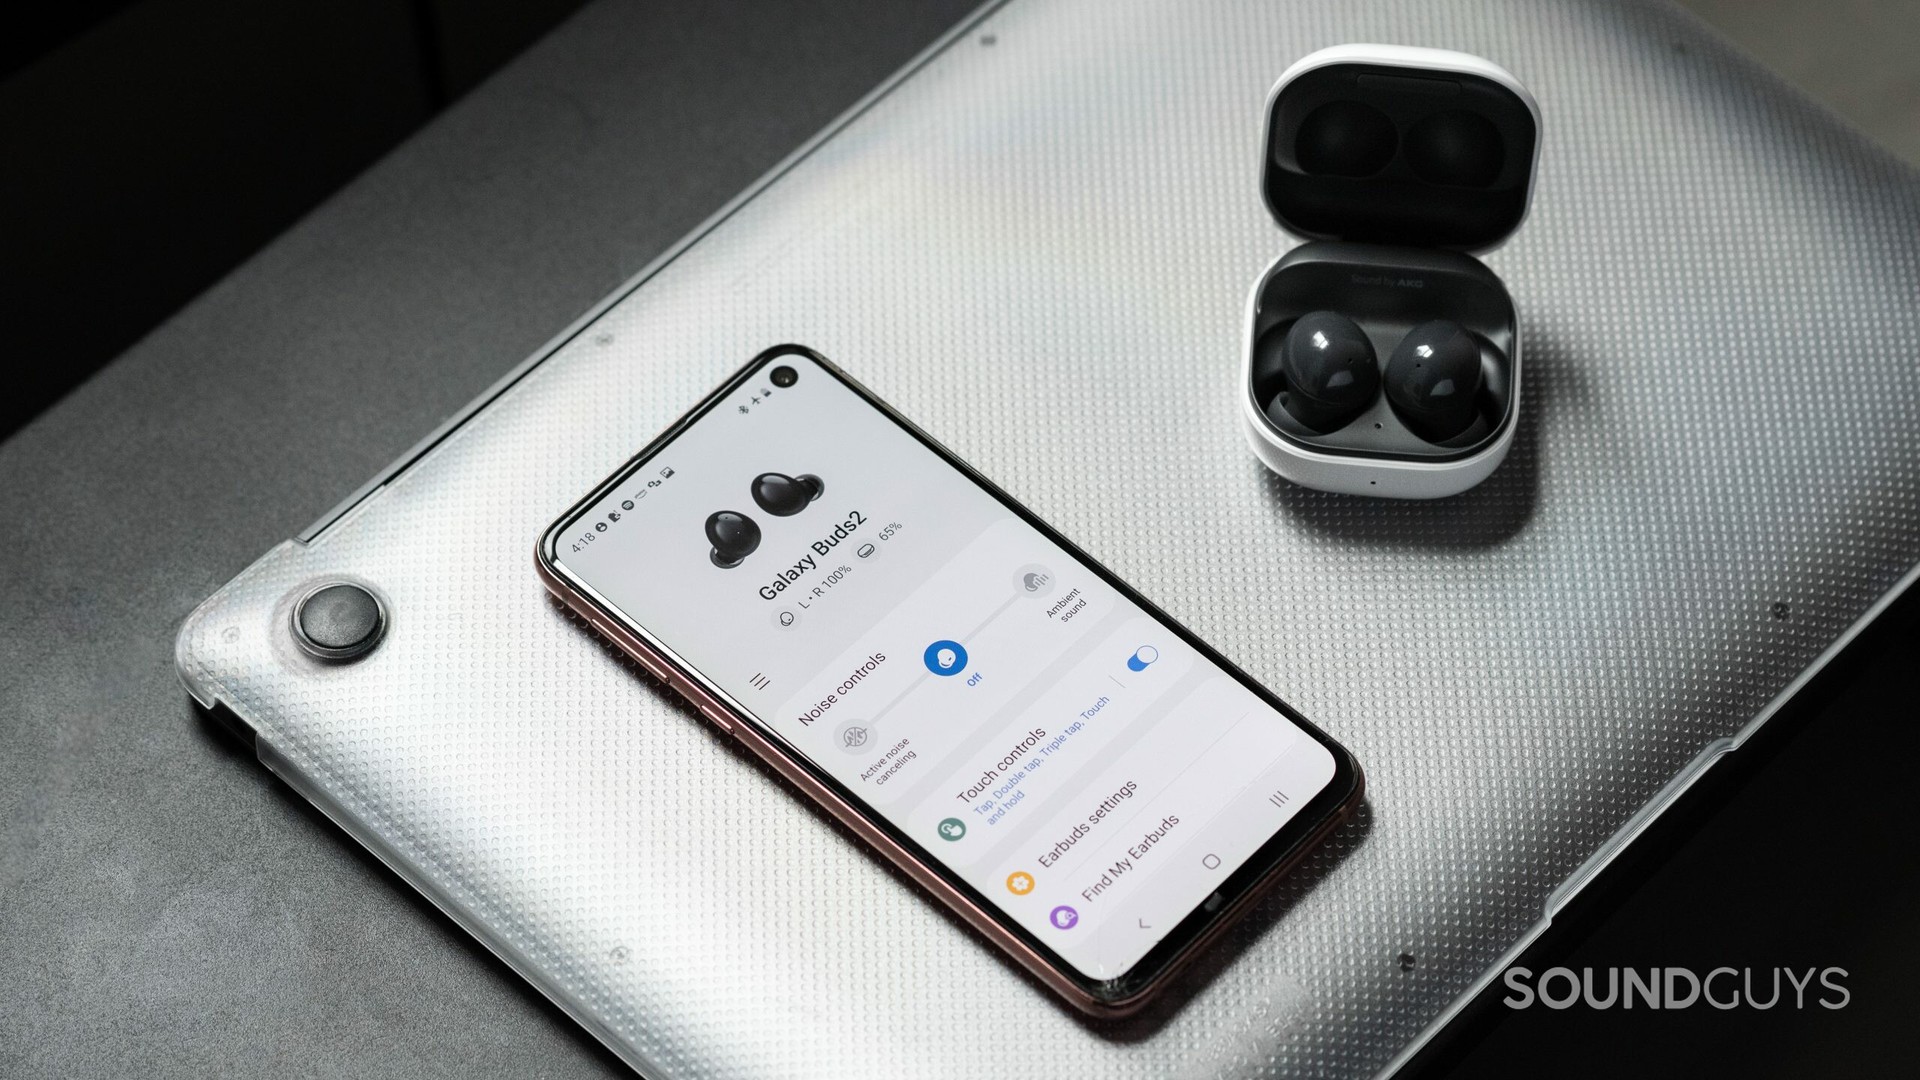 Samsung Galaxy Buds 2 noise cancelling true wireless earbuds next to phone